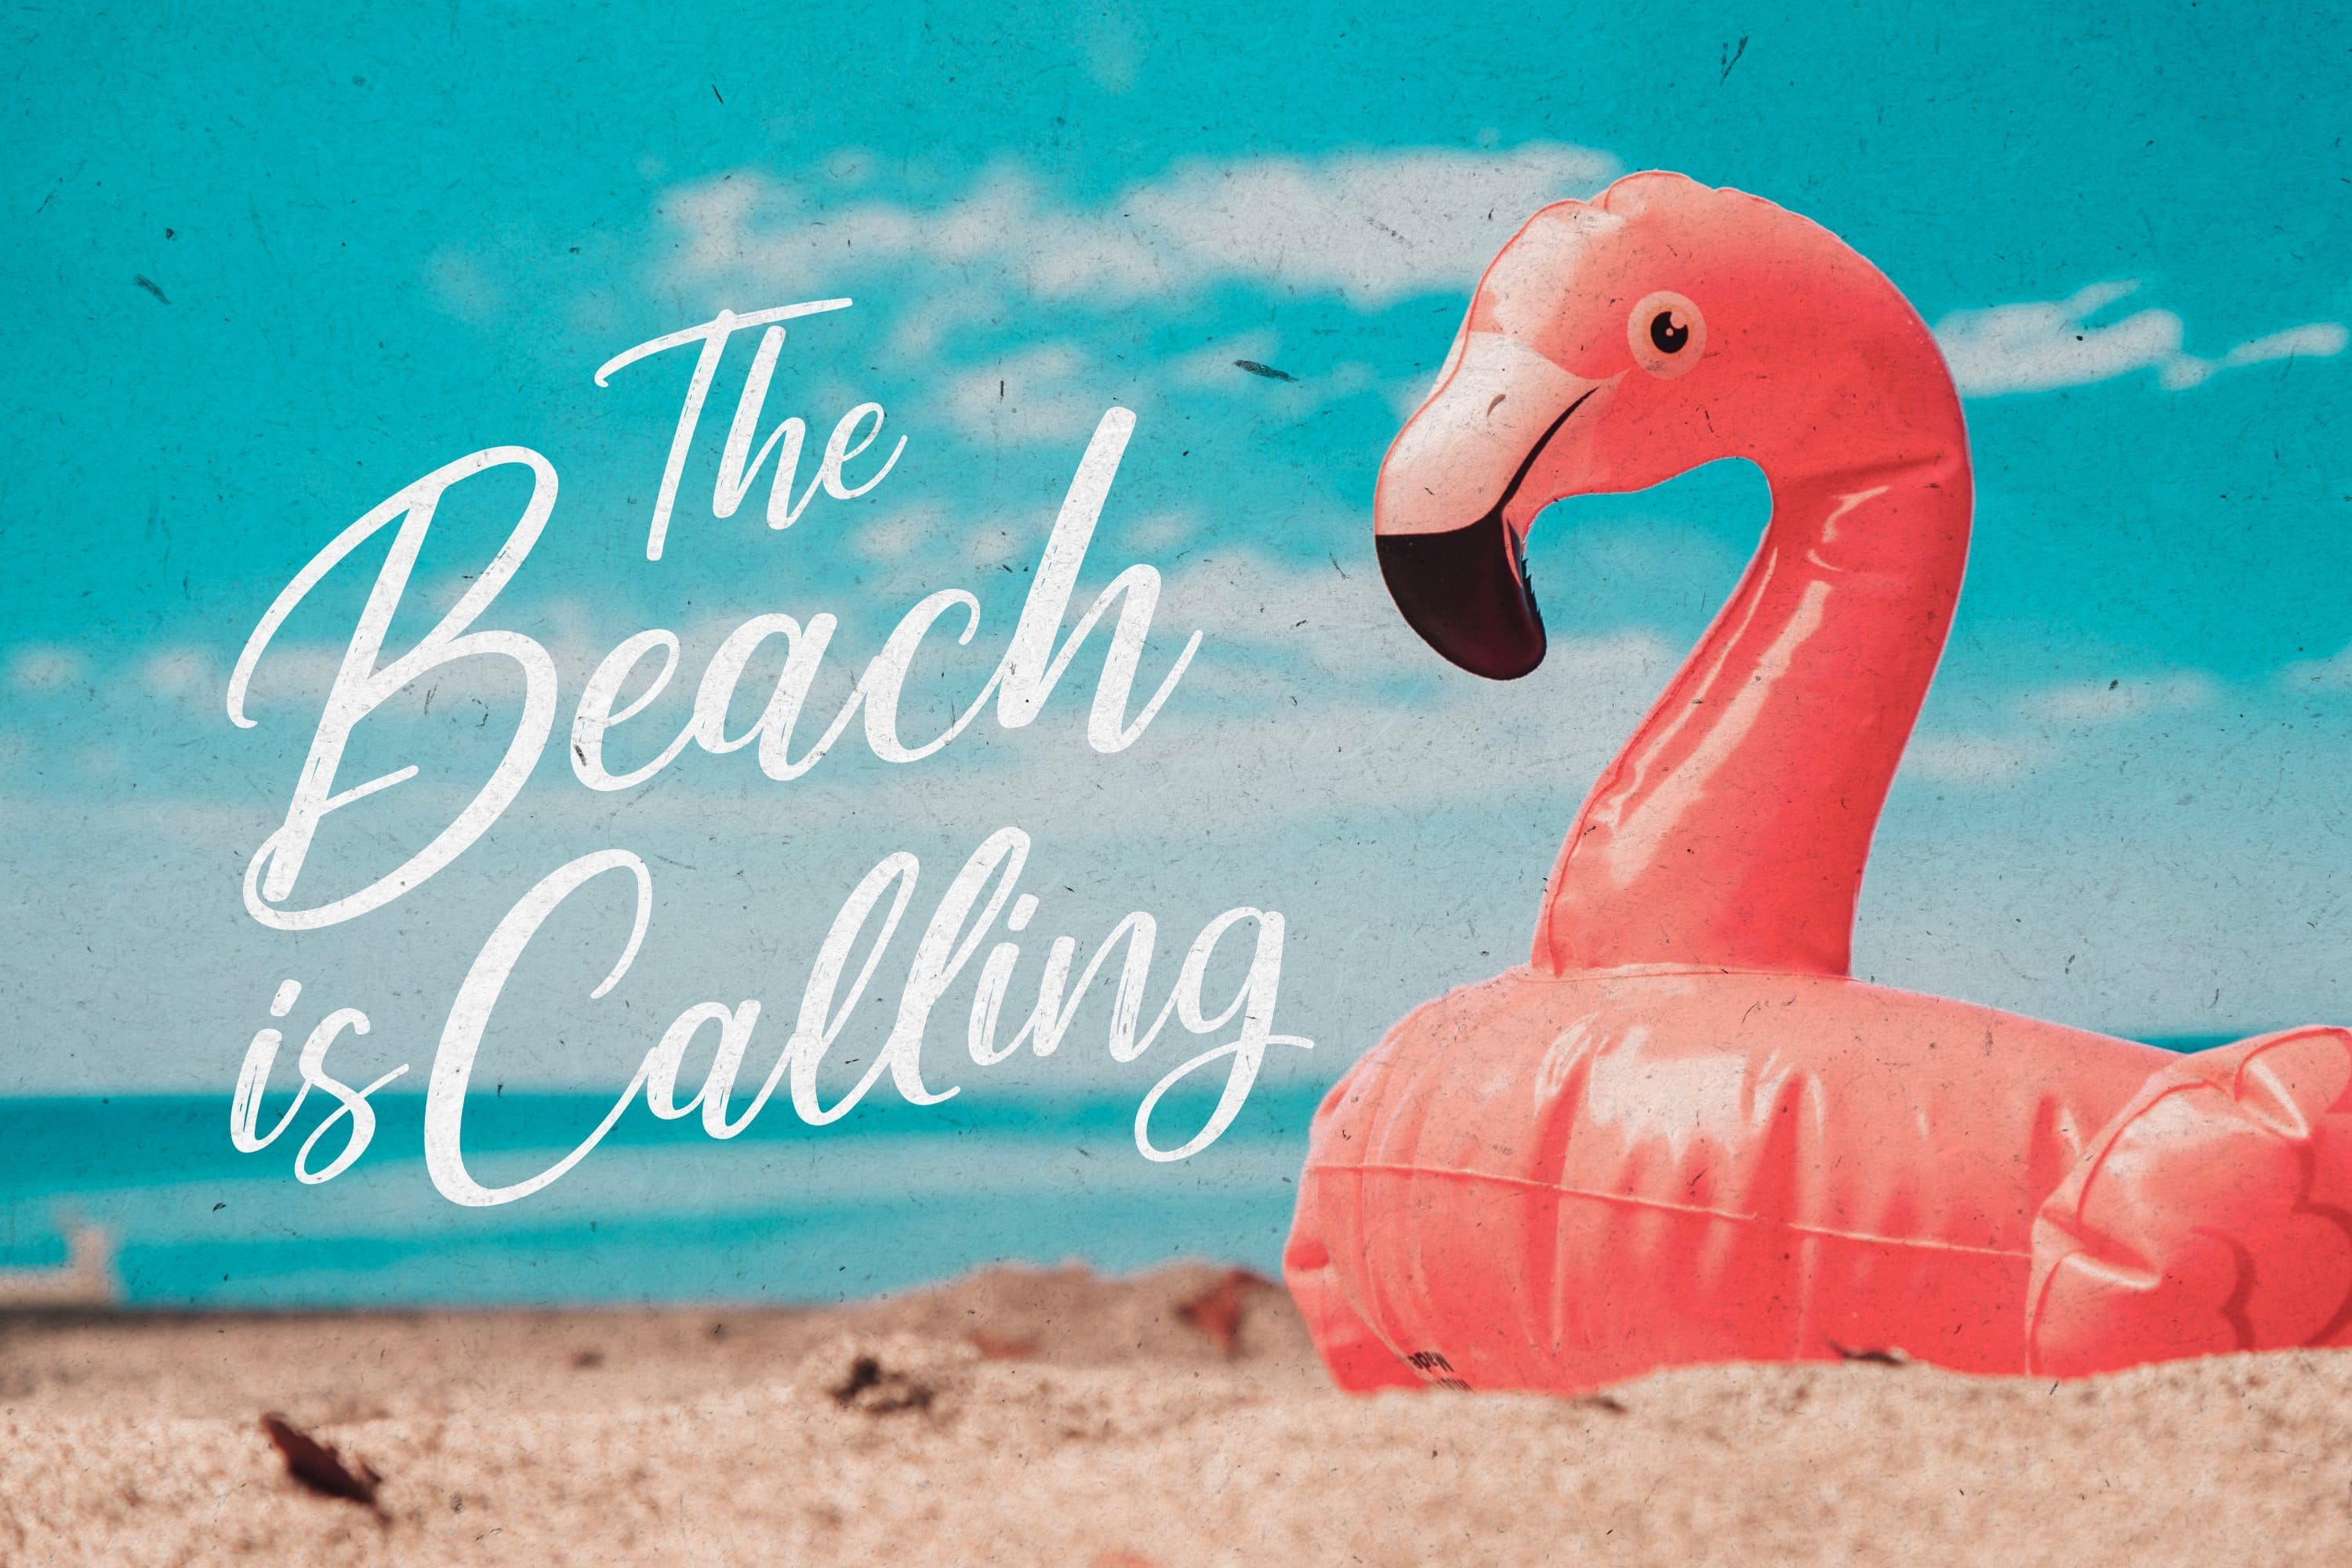 The Beach is Calling and pink flamingo.